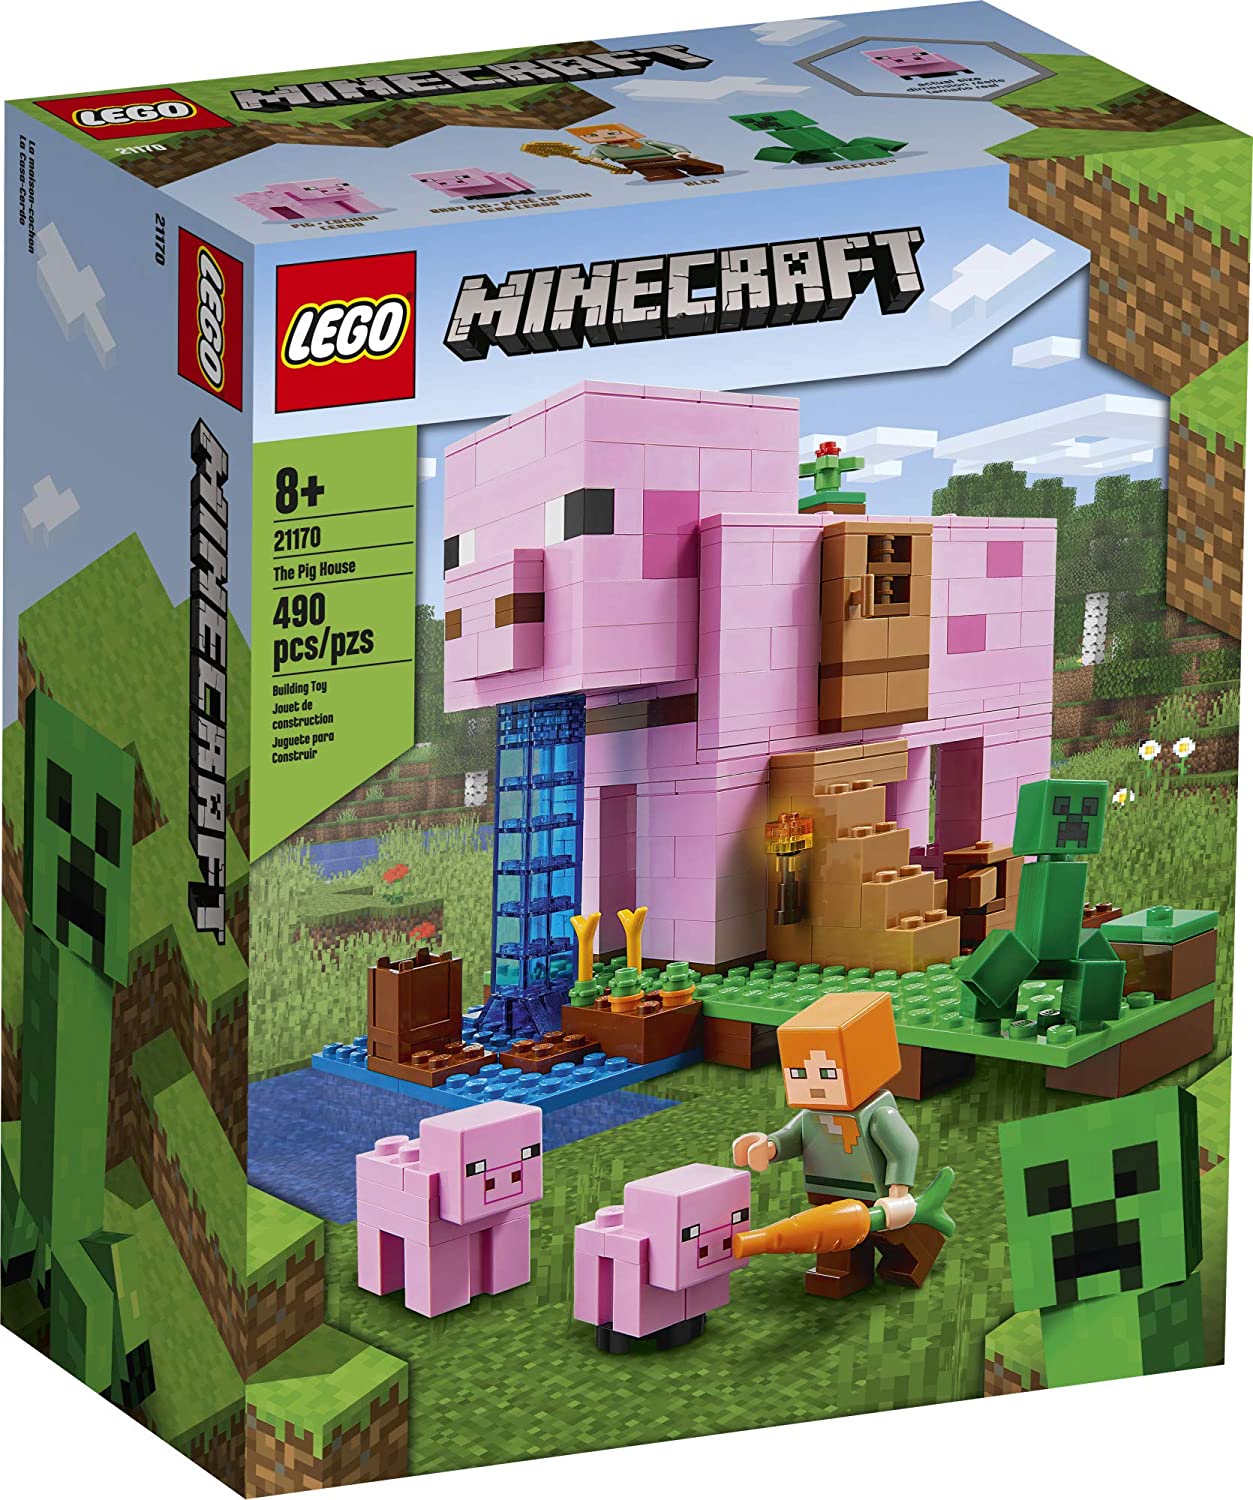 LEGO® Minecraft 21170 The Pig House (490 pieces) – AESOP'S FABLE